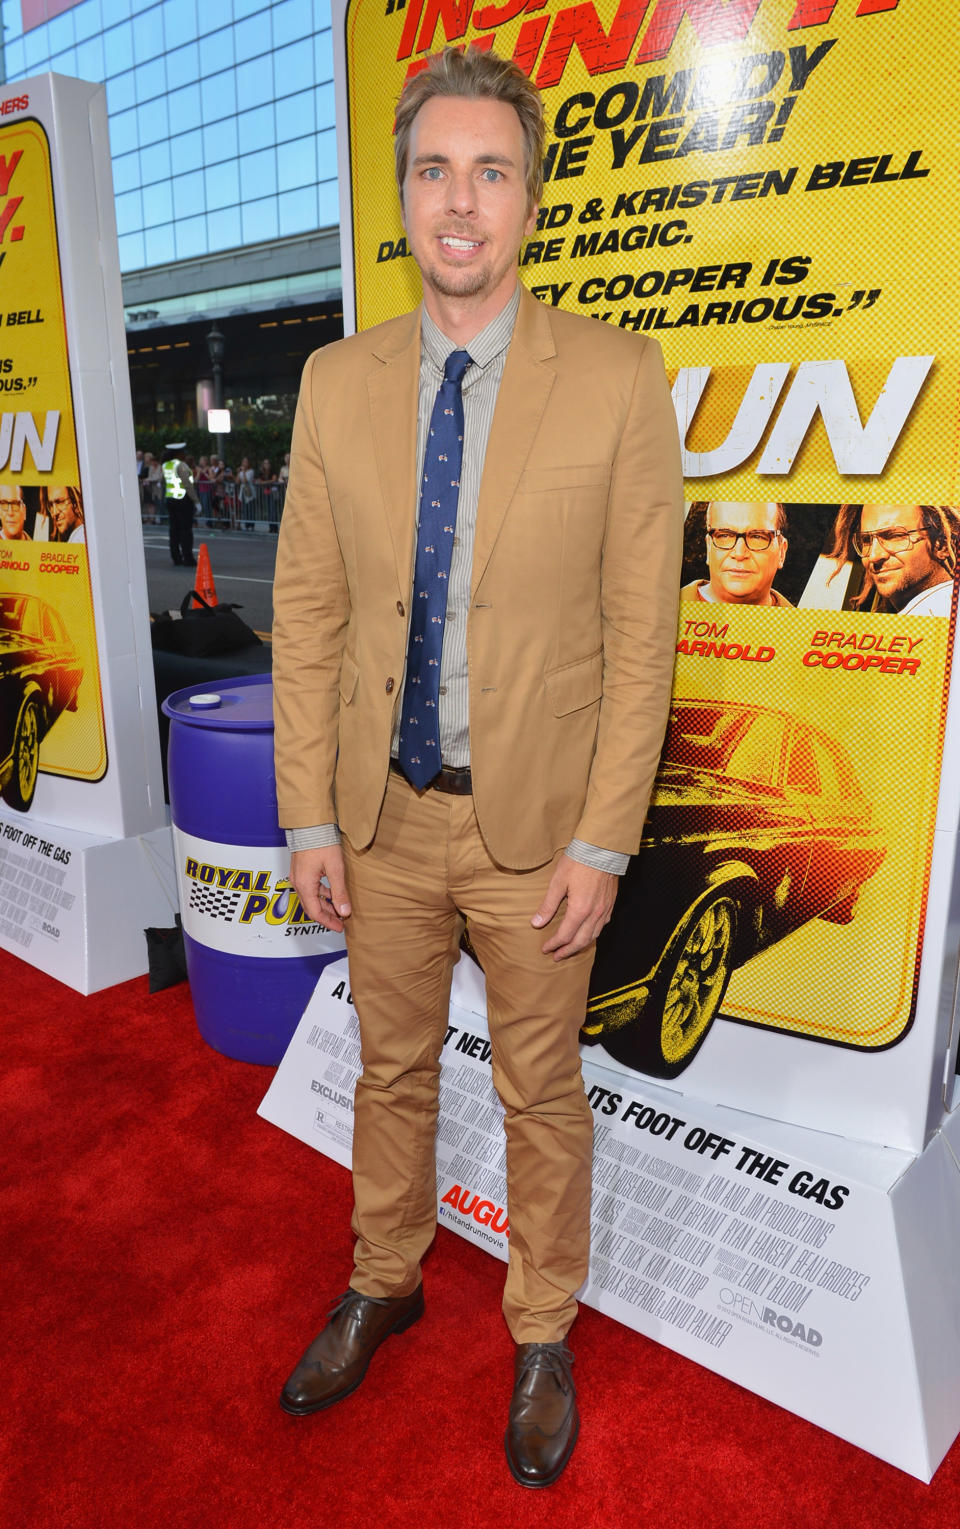 Dax Shepard at the Los Angeles premiere of "Hit & Run" on August 14, 2012.